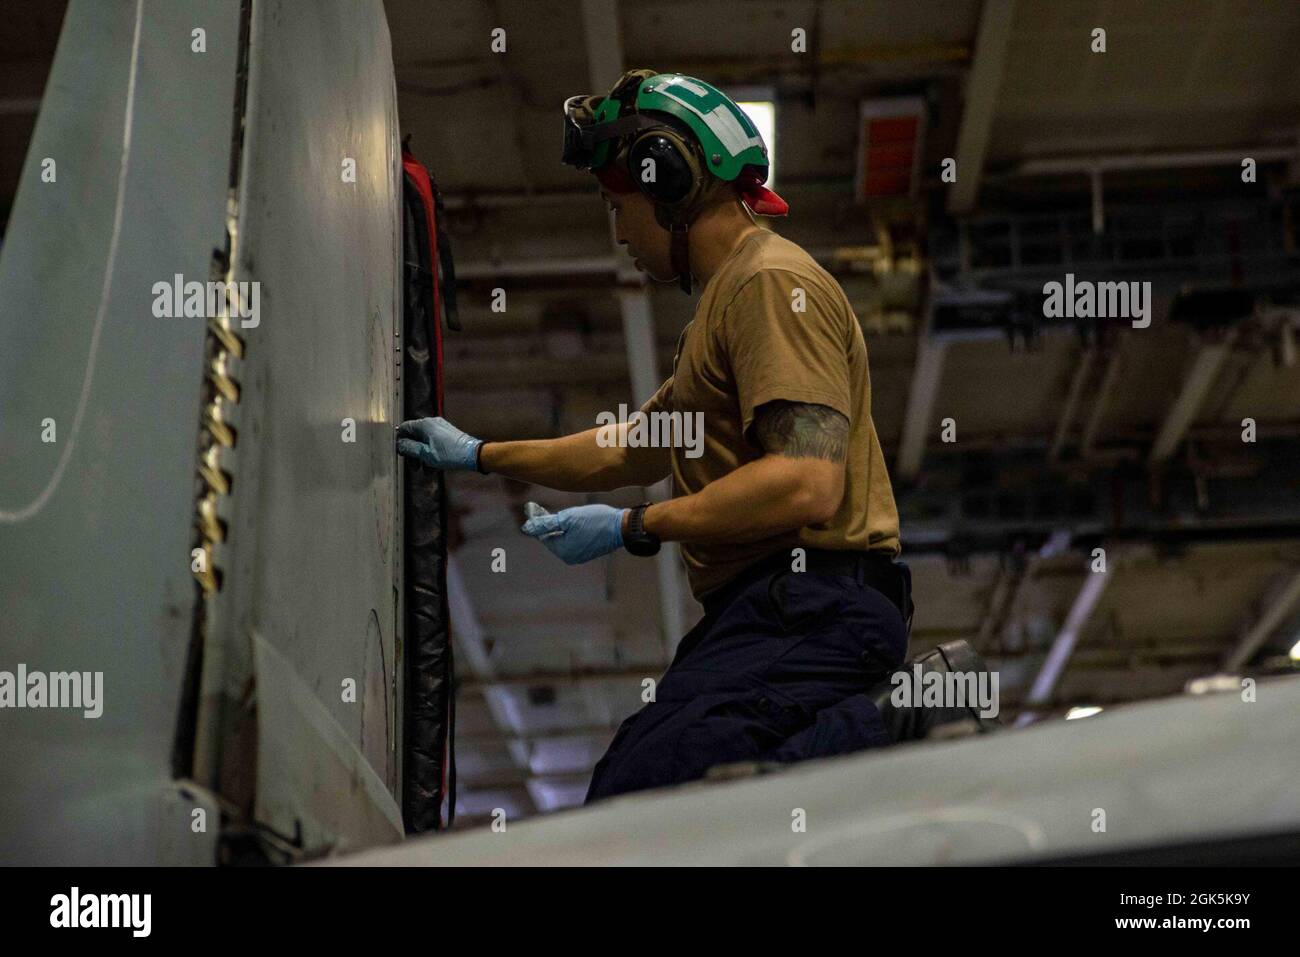 210809-N-DW158-1025 ARABIAN SEA (Aug. 9, 2021) – Aviation Structural Mechanic 3rd Class Nile Watson replaces screws on the wing of an F/A-18E Super Hornet fighter jet, attached to the “Dambusters” of Strike Fighter Squadron (VFA) 195, in the hangar bay of aircraft carrier USS Ronald Reagan (CVN 76) in the Arabian Sea, Aug. 9. Ronald Reagan is deployed to the U.S. 5th Fleet area of operations in support of naval operations to ensure maritime stability and security in the Central Region, connecting the Mediterranean and Pacific through the western Indian Ocean and three strategic choke points. Stock Photo